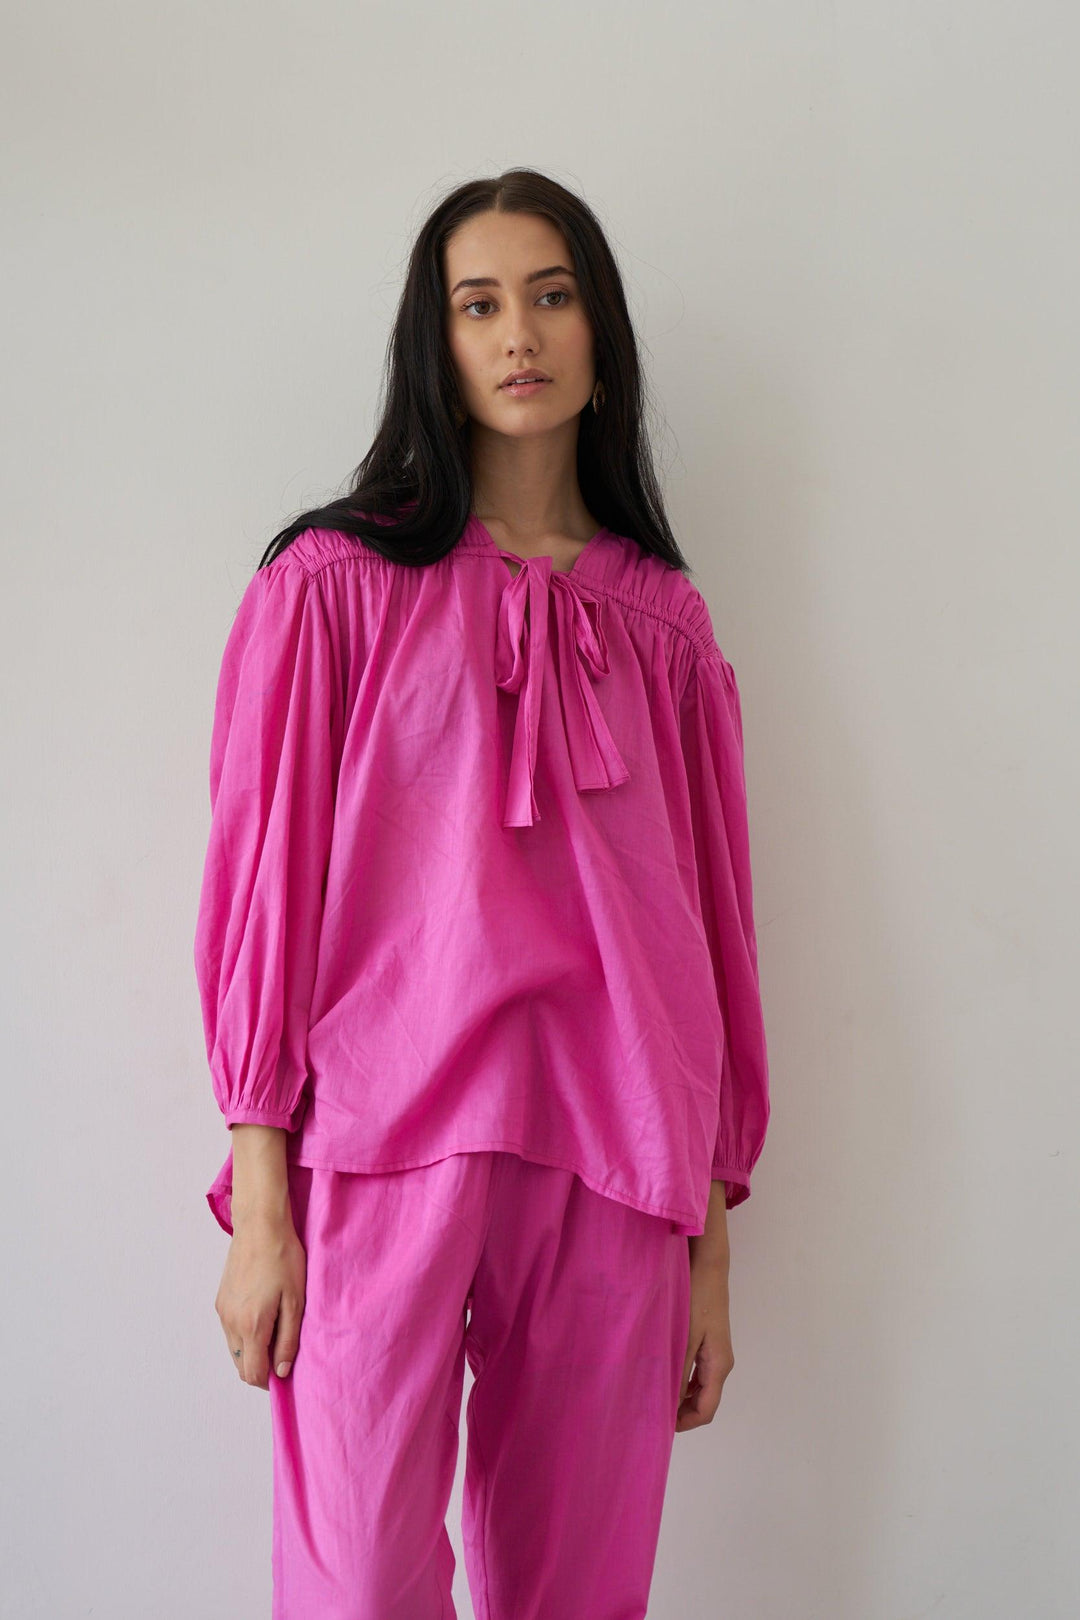 Pink Knot Top - ANI CLOTHING